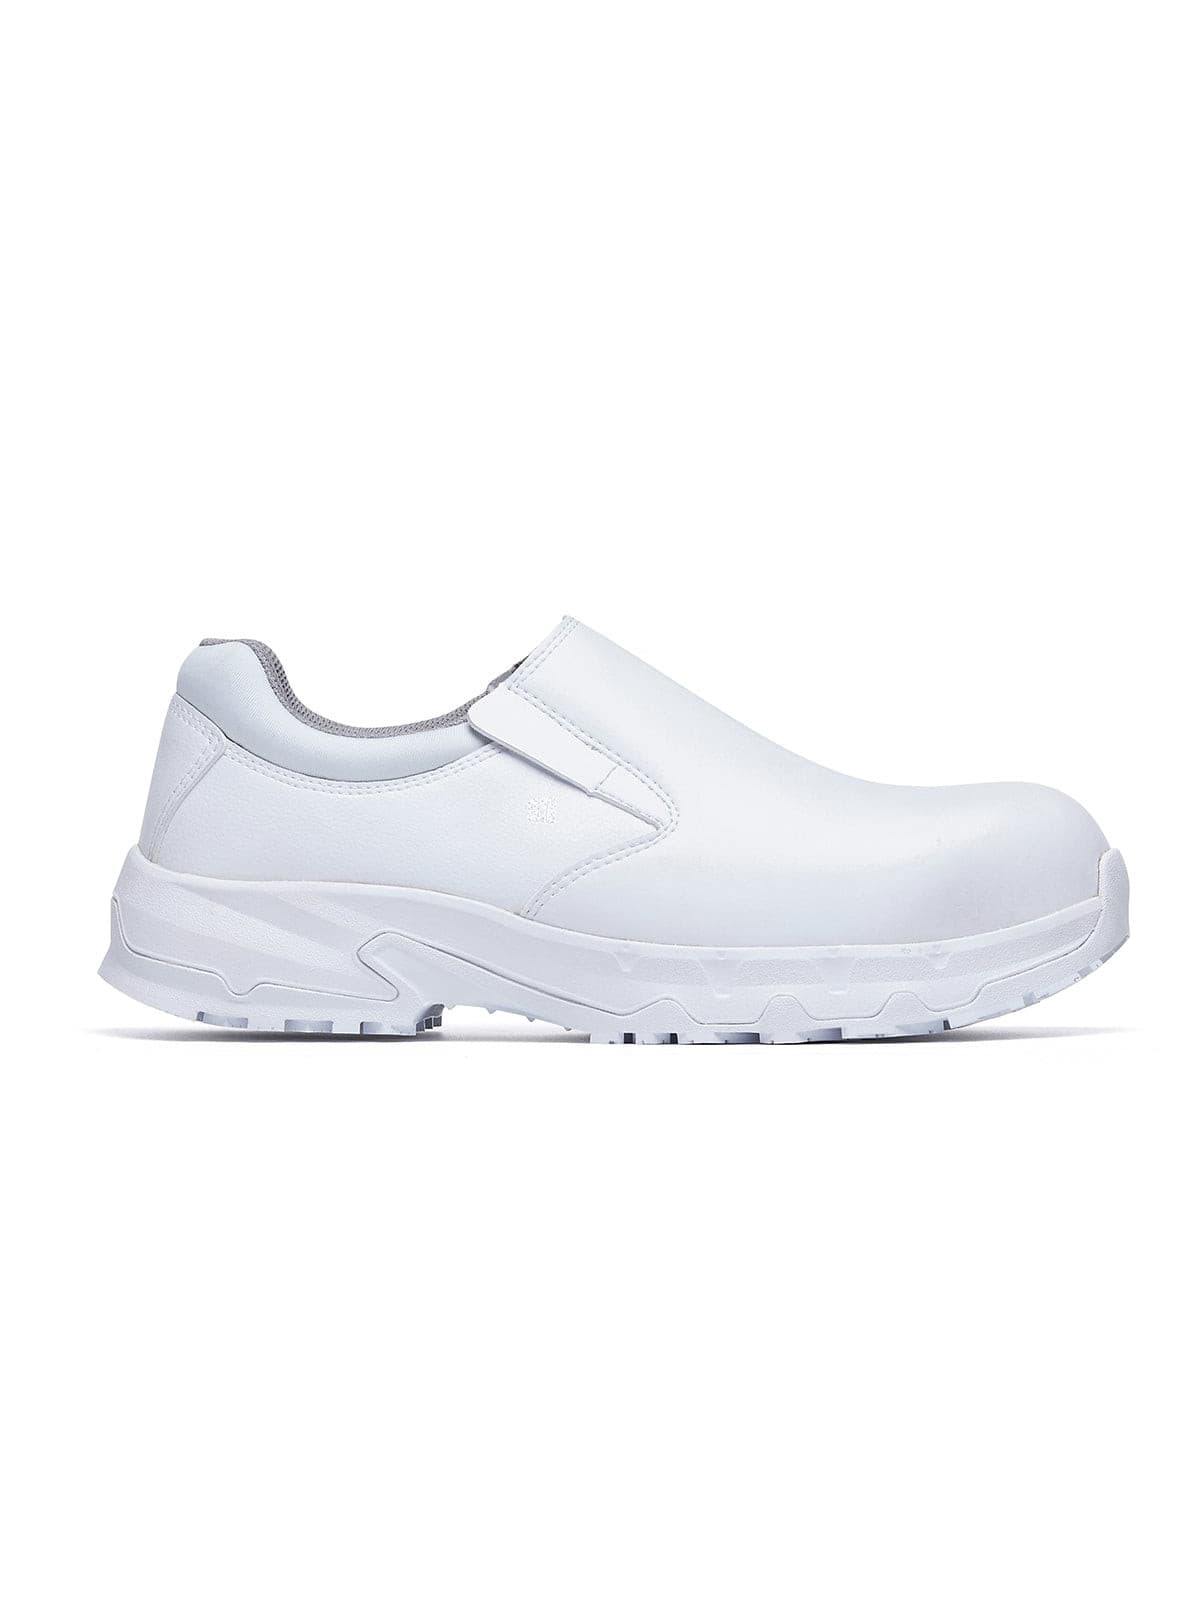 Unisex Safety Shoe Brandon White (S3) by  Shoes For Crews.